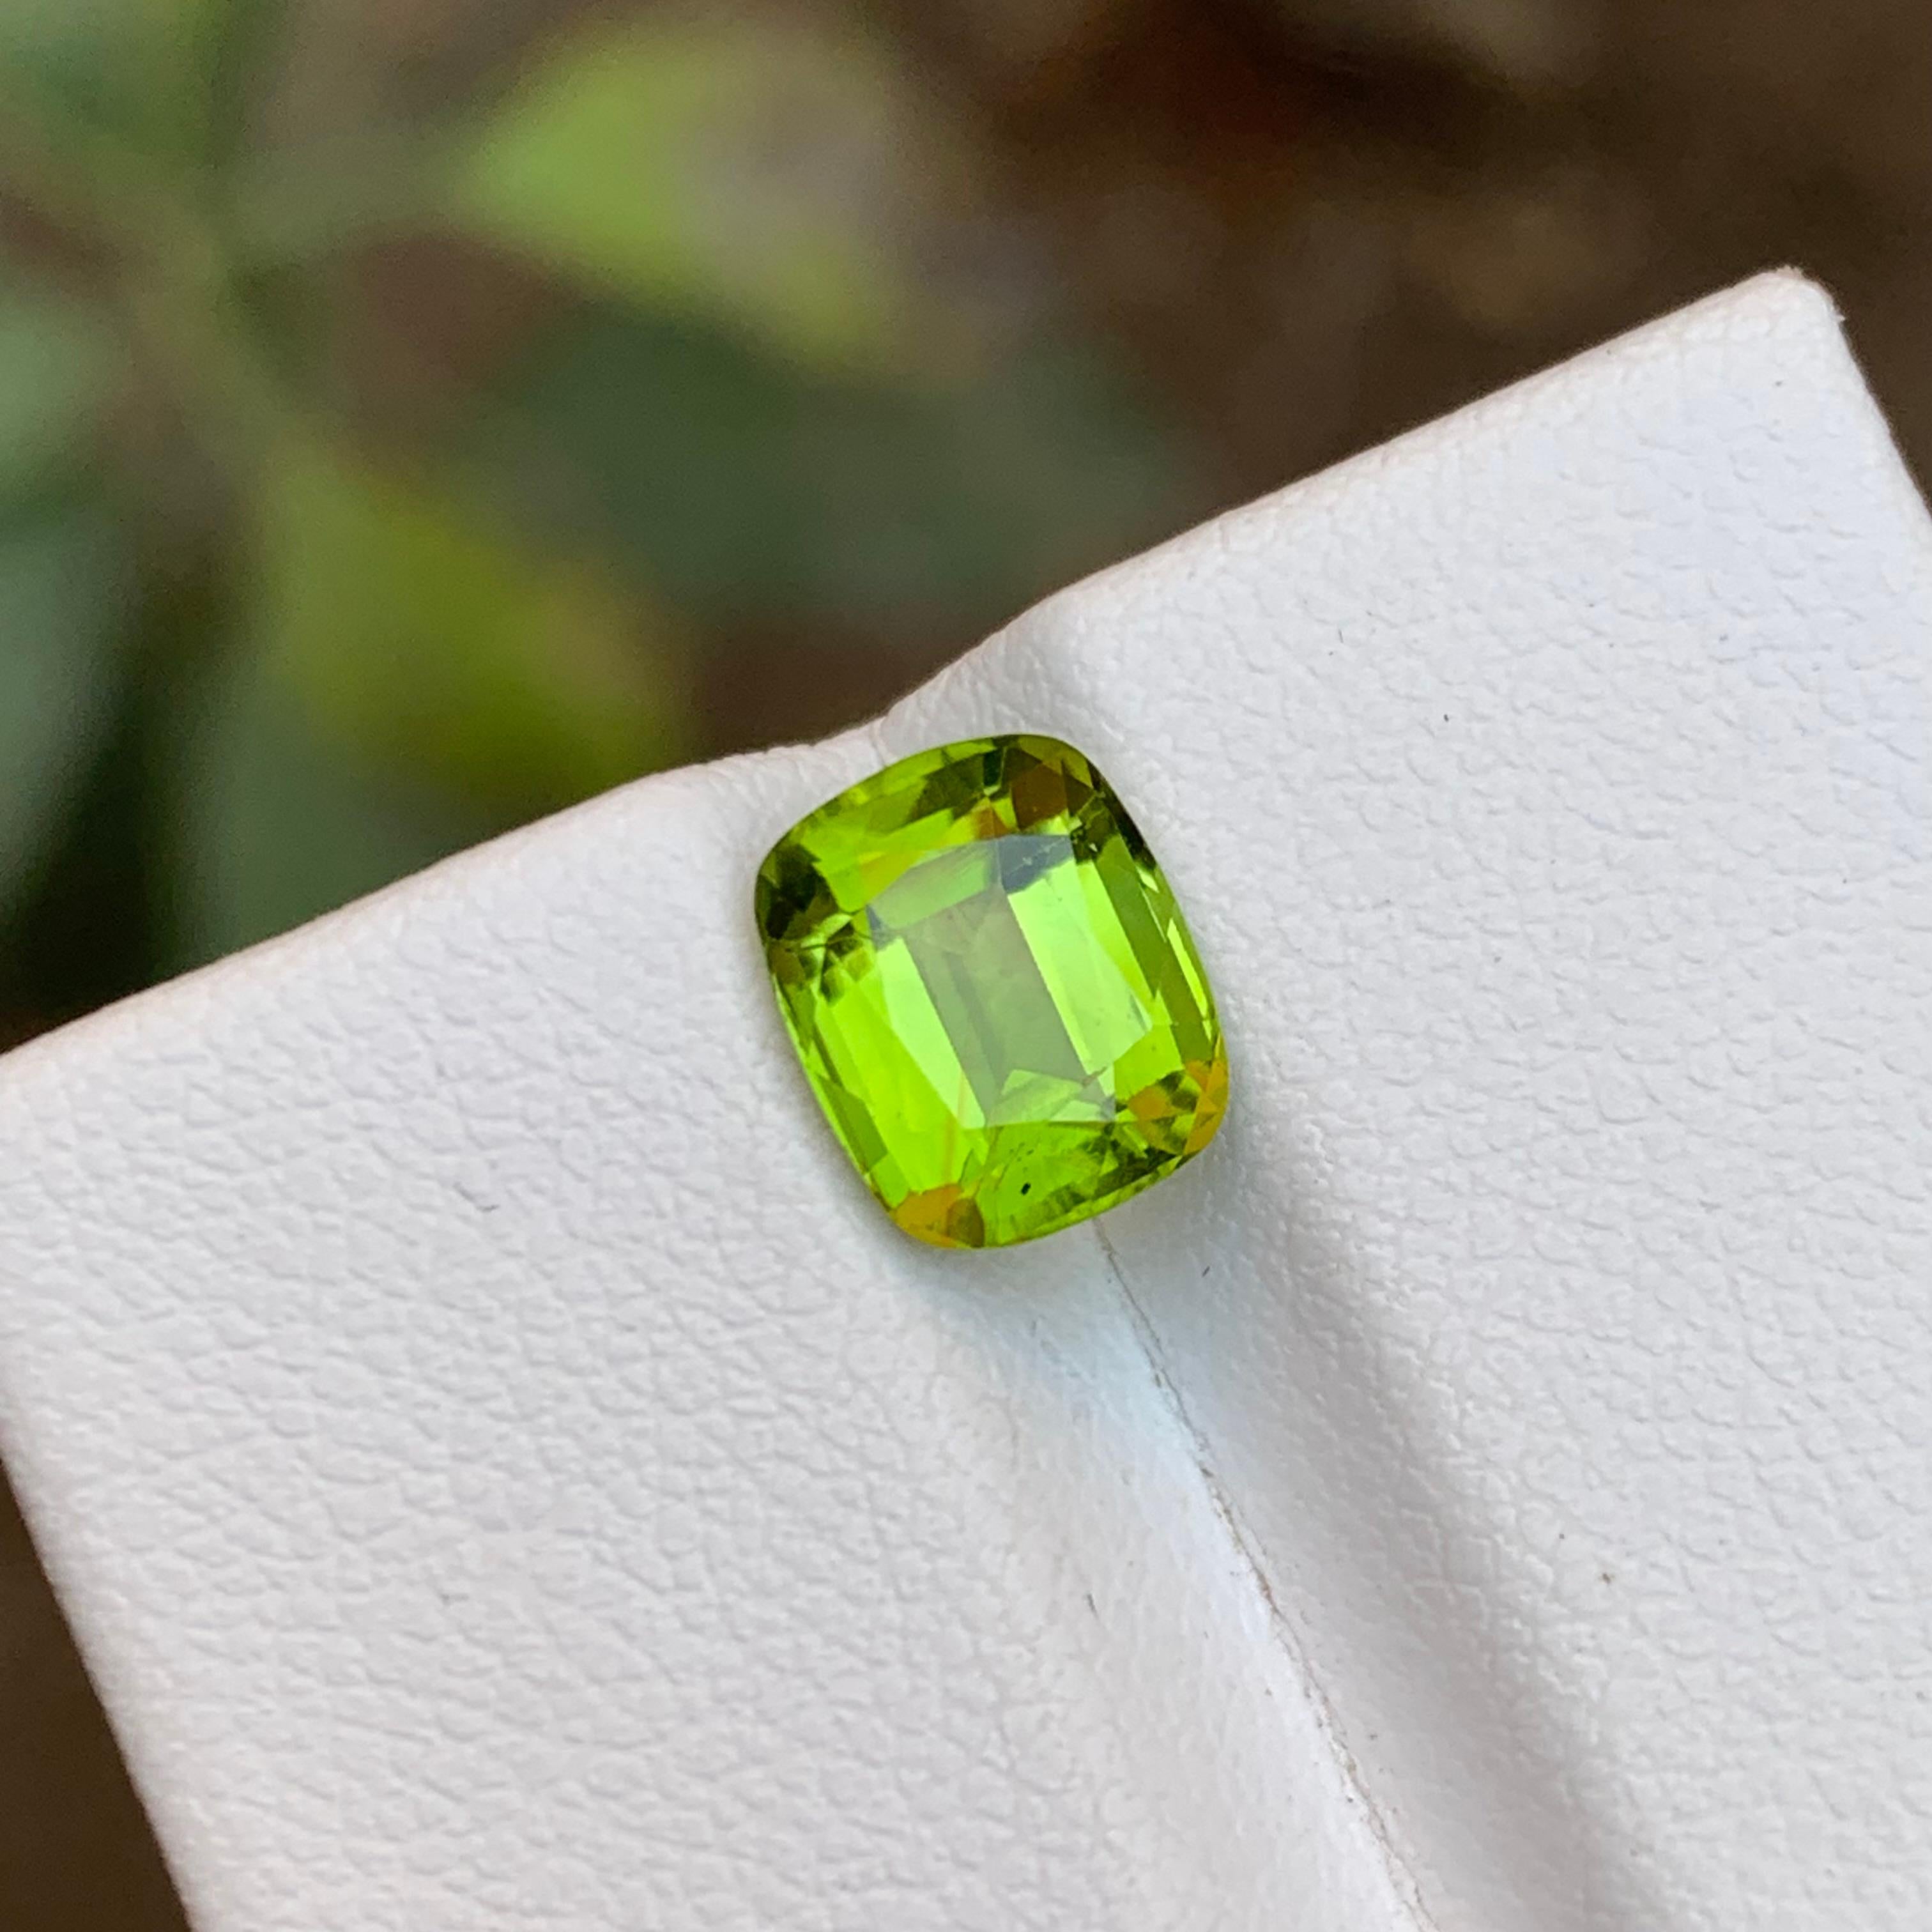 Contemporary Rare Green Natural Peridot Loose Gemstone, 2.30 Ct Cushion Cut Ideal for Ring For Sale